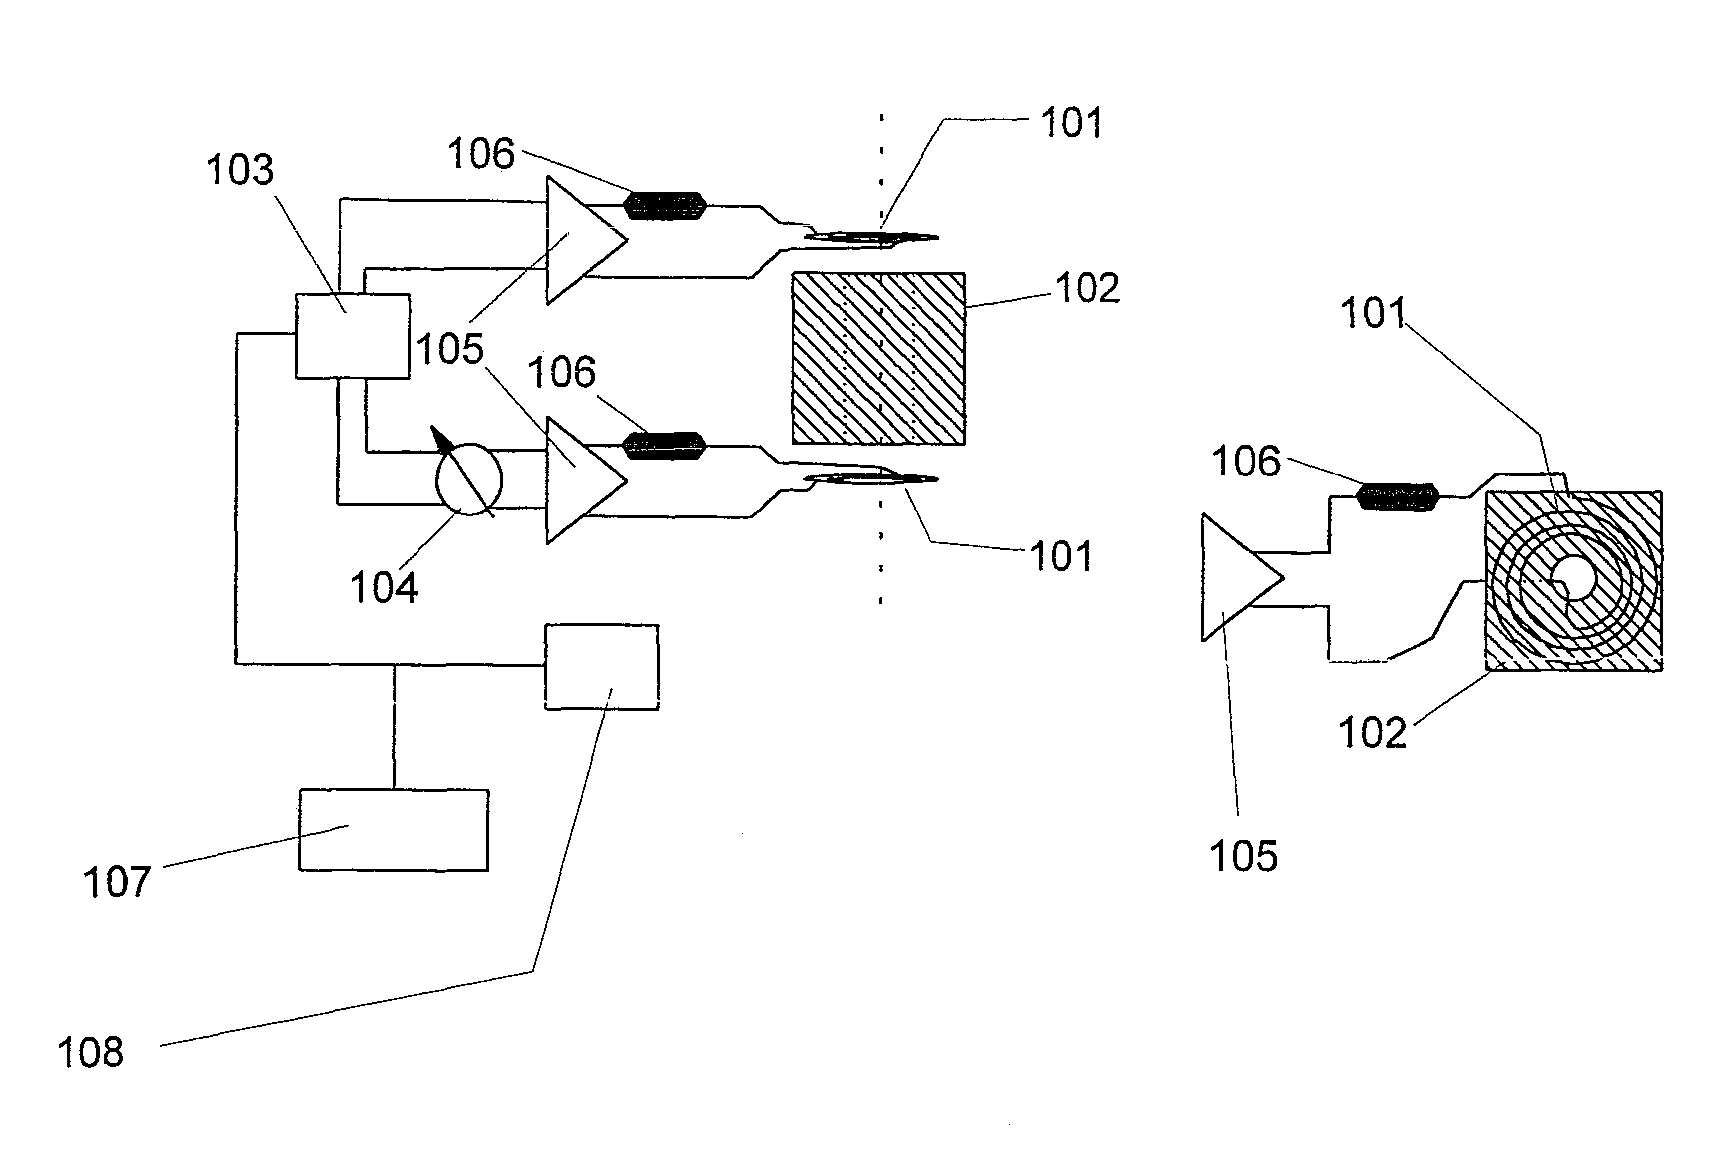 Efficient RF electromagnetic propulsion system with communications capability